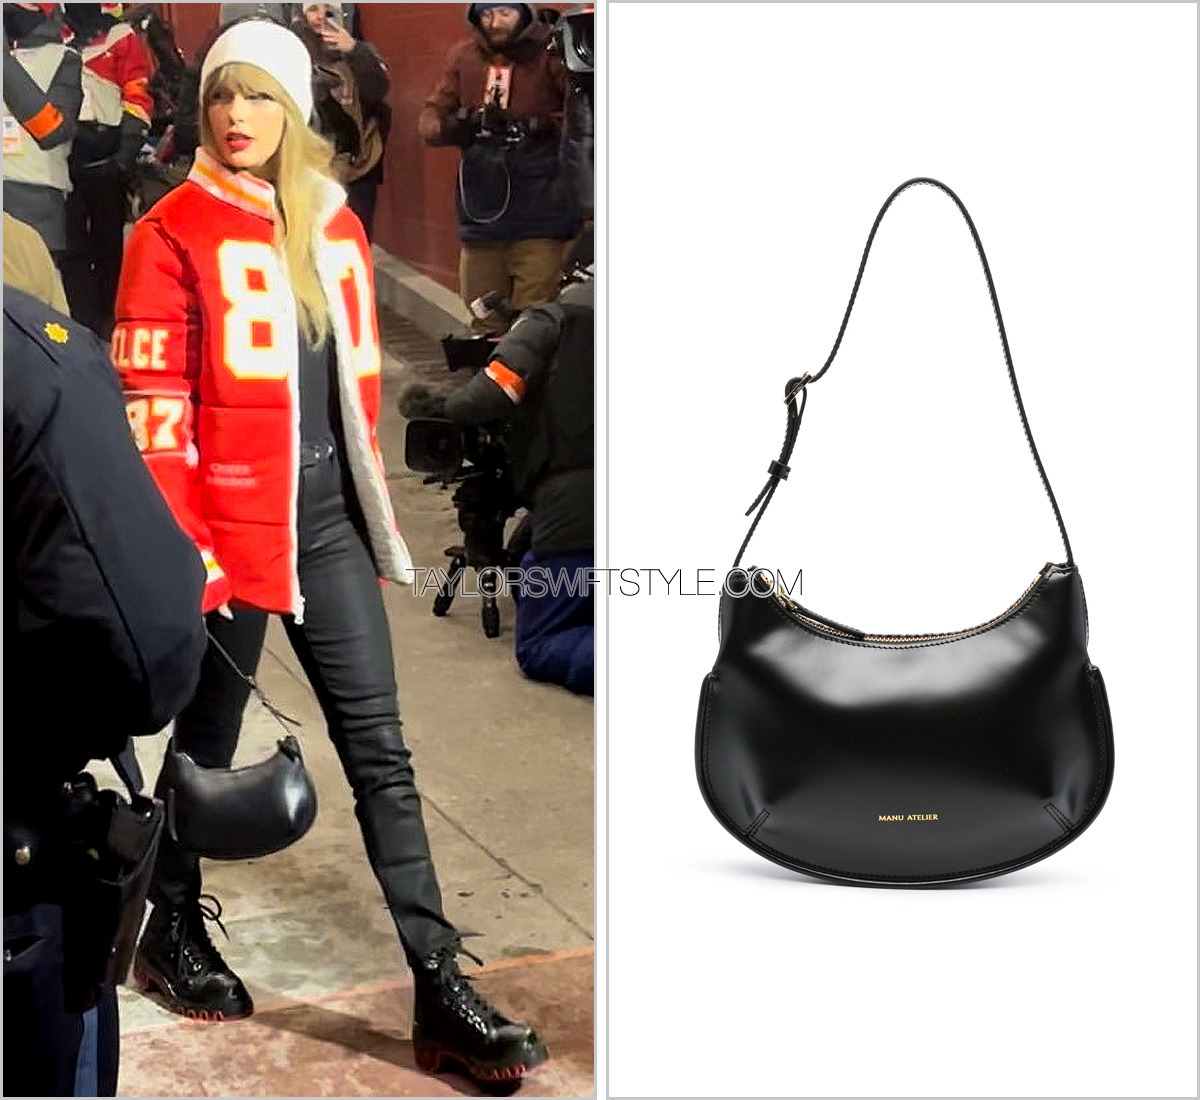 Taylor Swift Totes Her Elie Saab Bag: Photo 2667345, Taylor Swift Photos